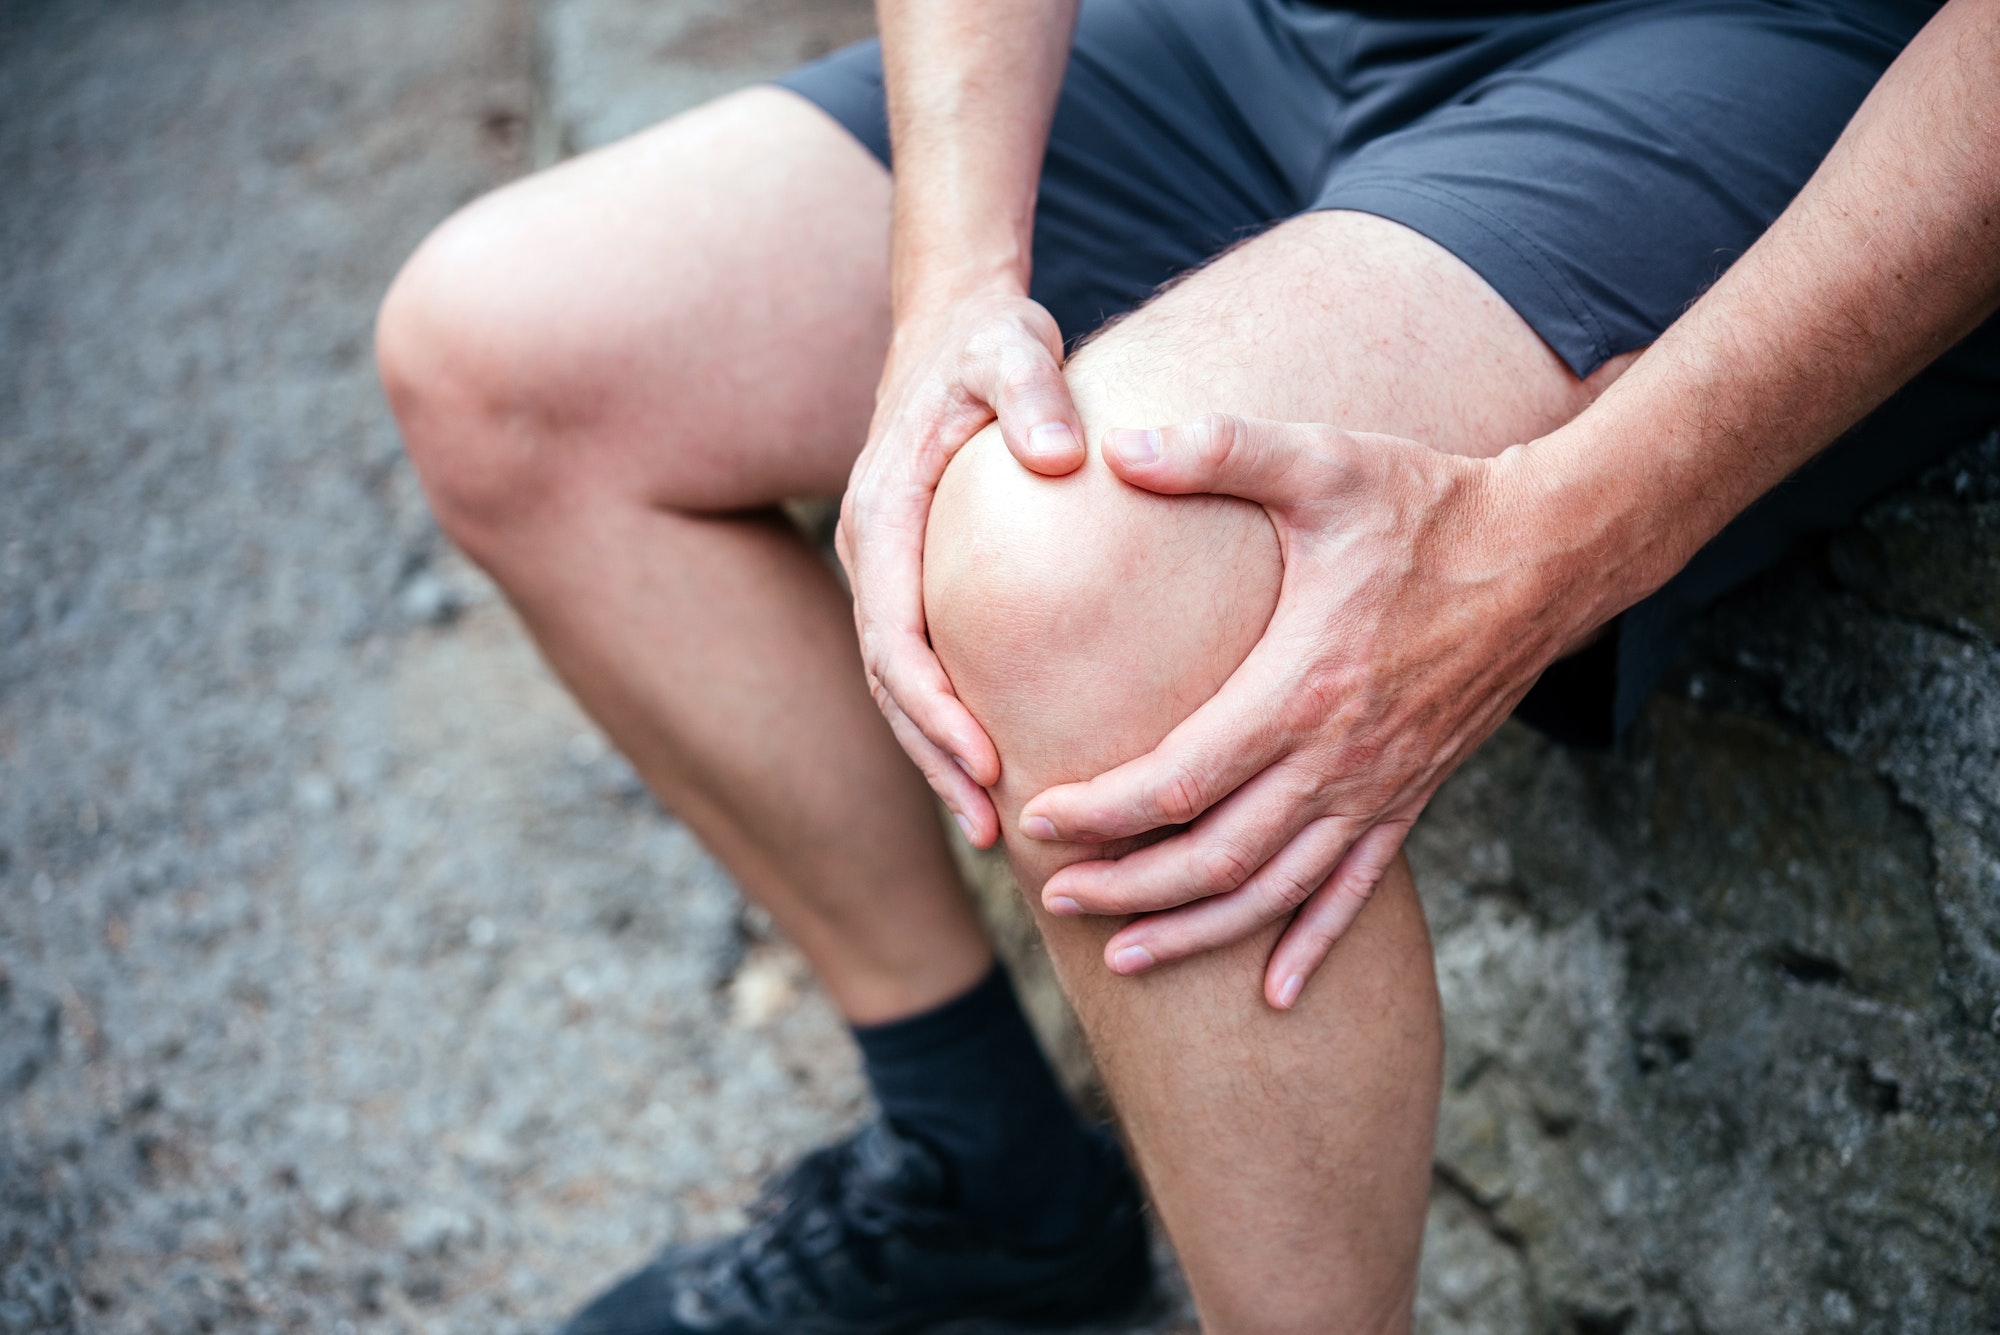 Male athlete having patellofemoral pain syndrome, common sports injuries